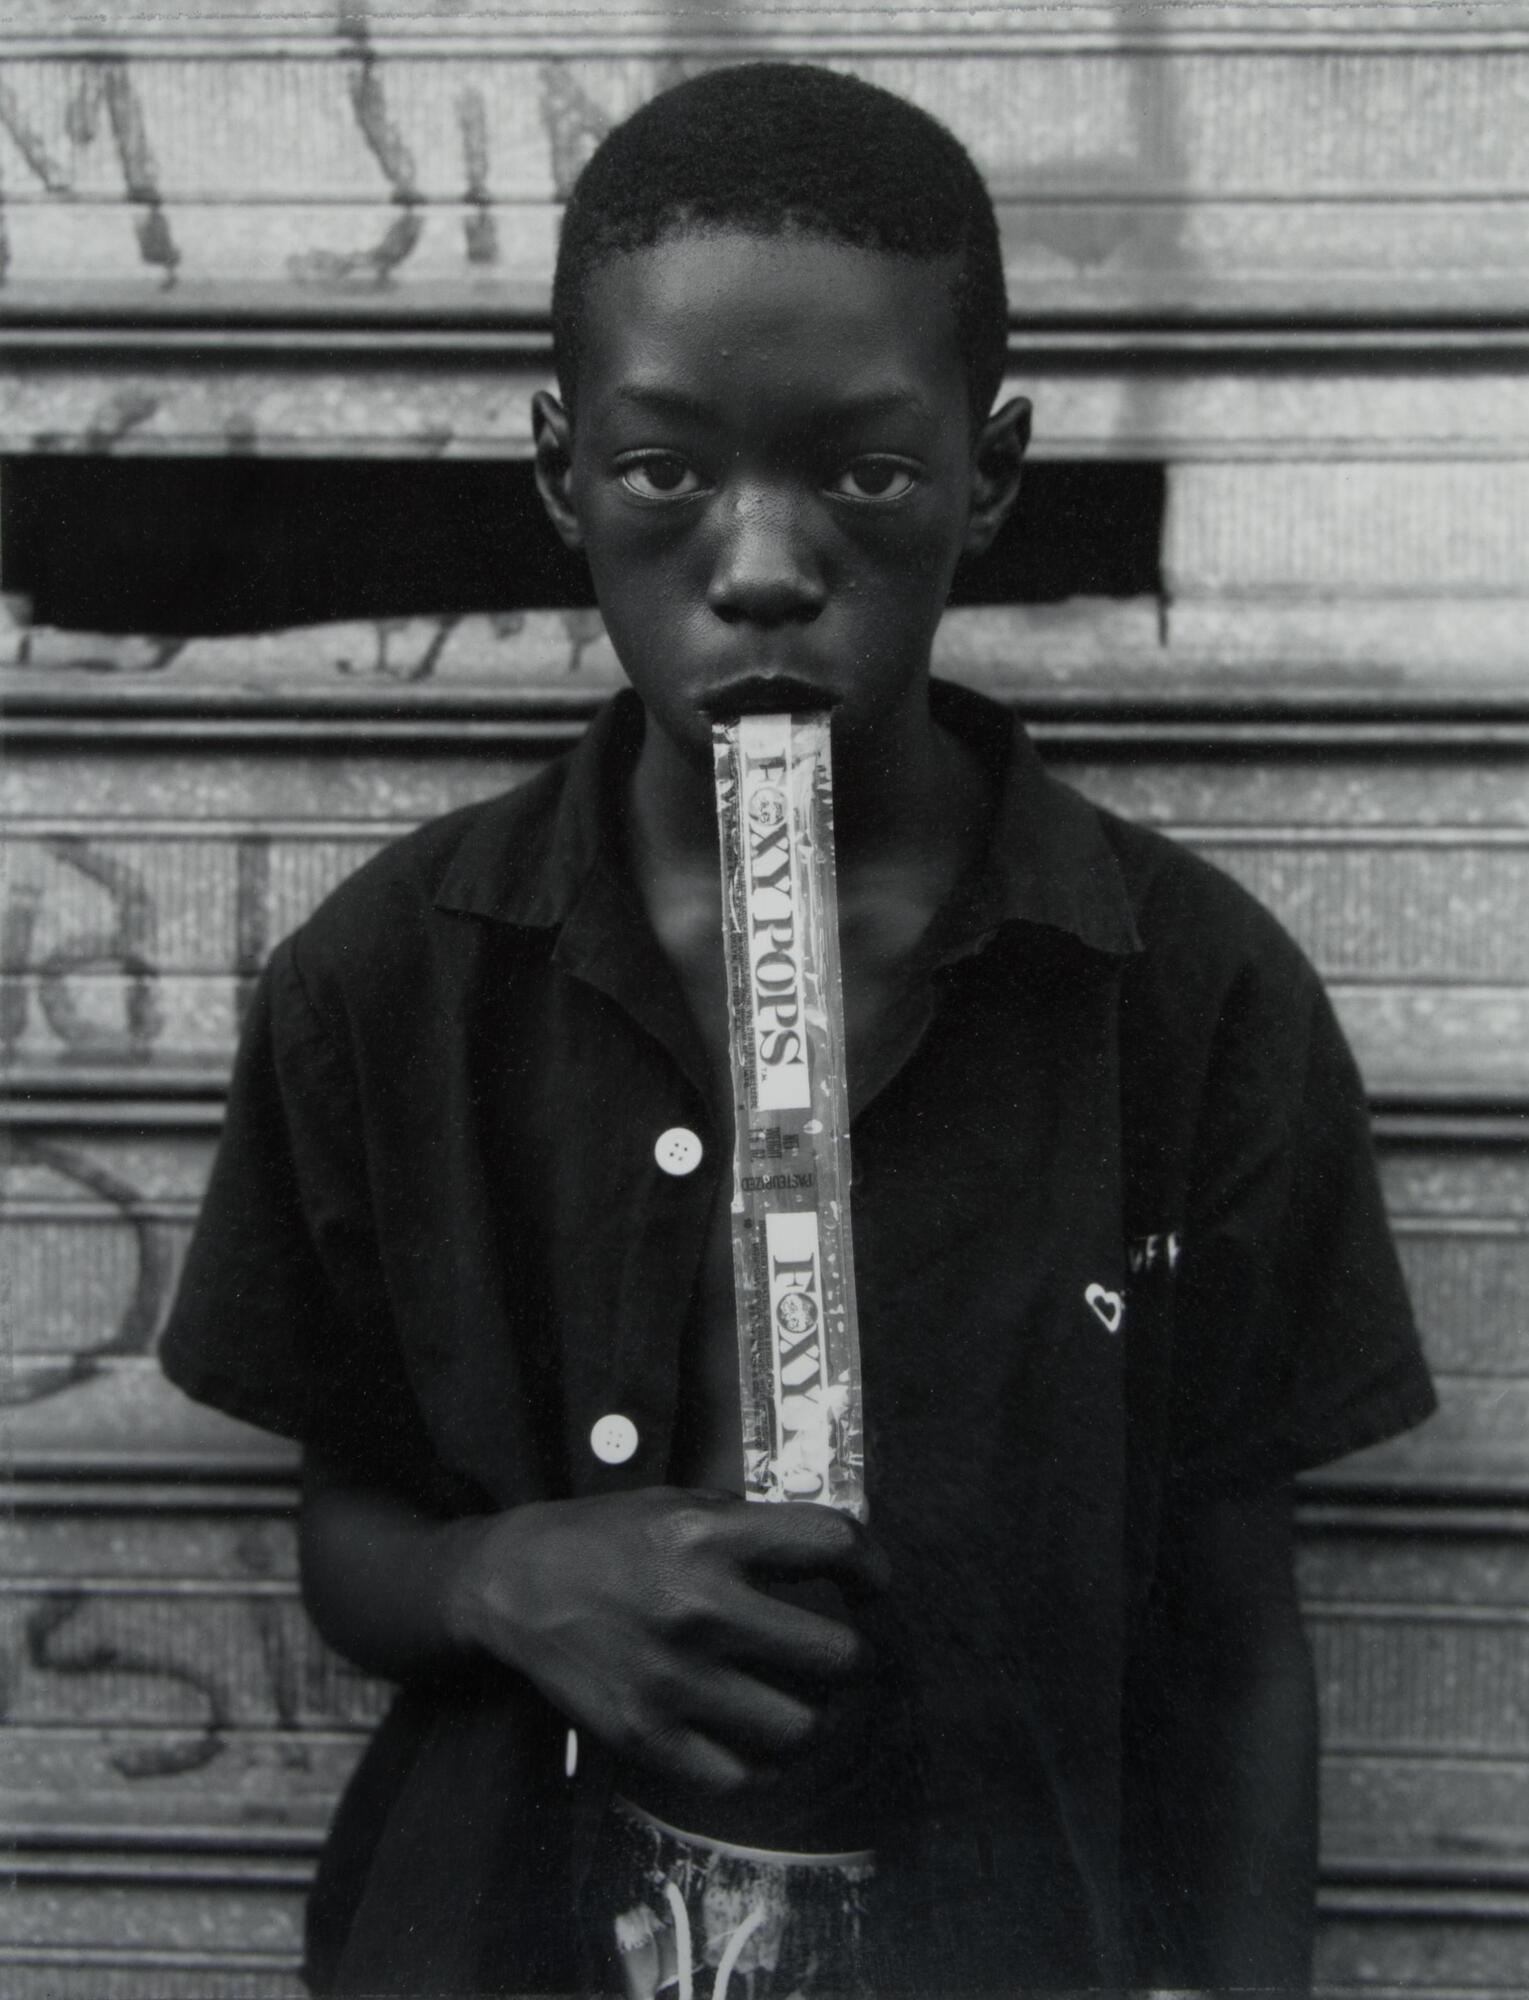 A photograph of a young African American boy standing against a metal slatted wall, on which graffiti is visible. He wears a dark button down shirt and holds a Foxy pop in his hand, eating it as the photograph was taken.